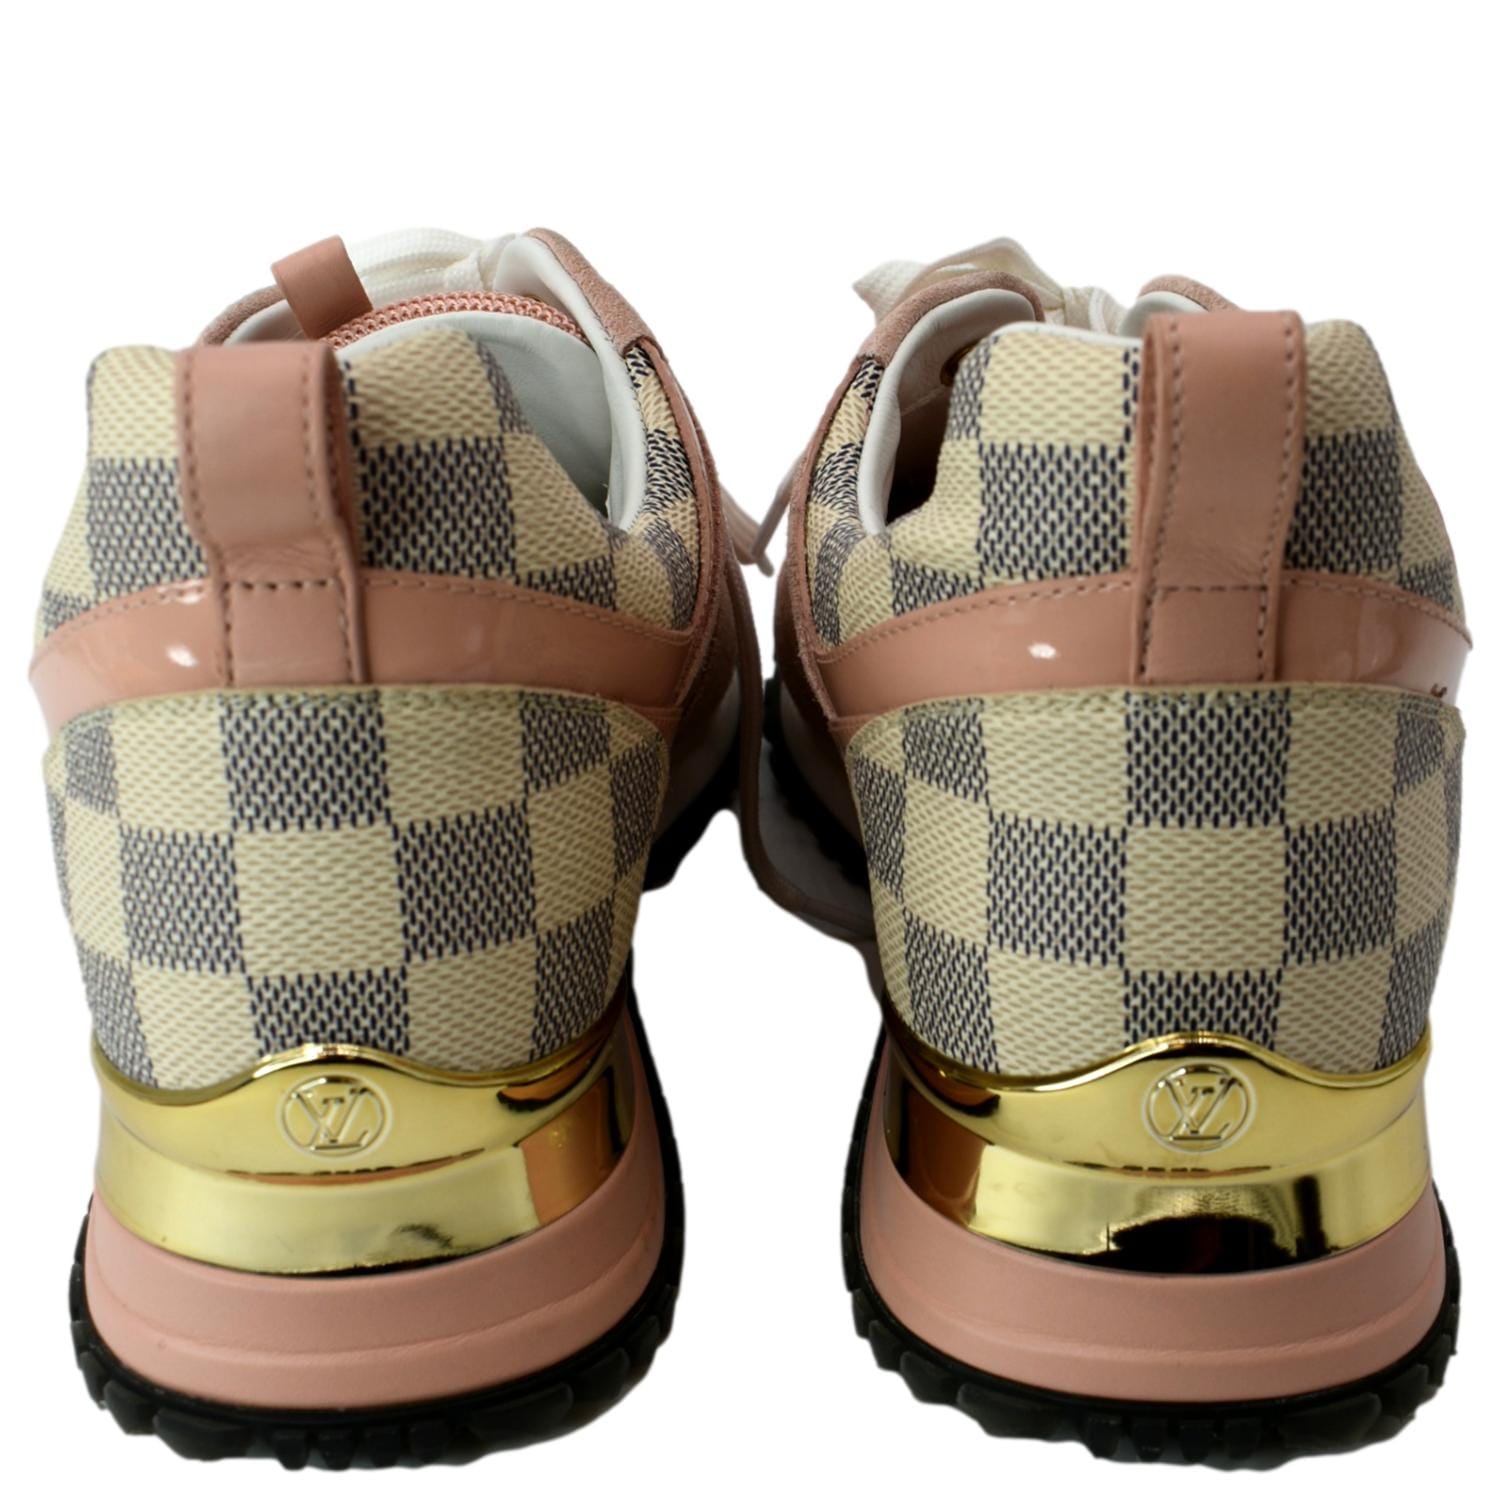 LOUIS VUITTON SNEAKERS RUN AWAY SHOES 11 45 LEATHER AND CANVAS DAMIER SHOES